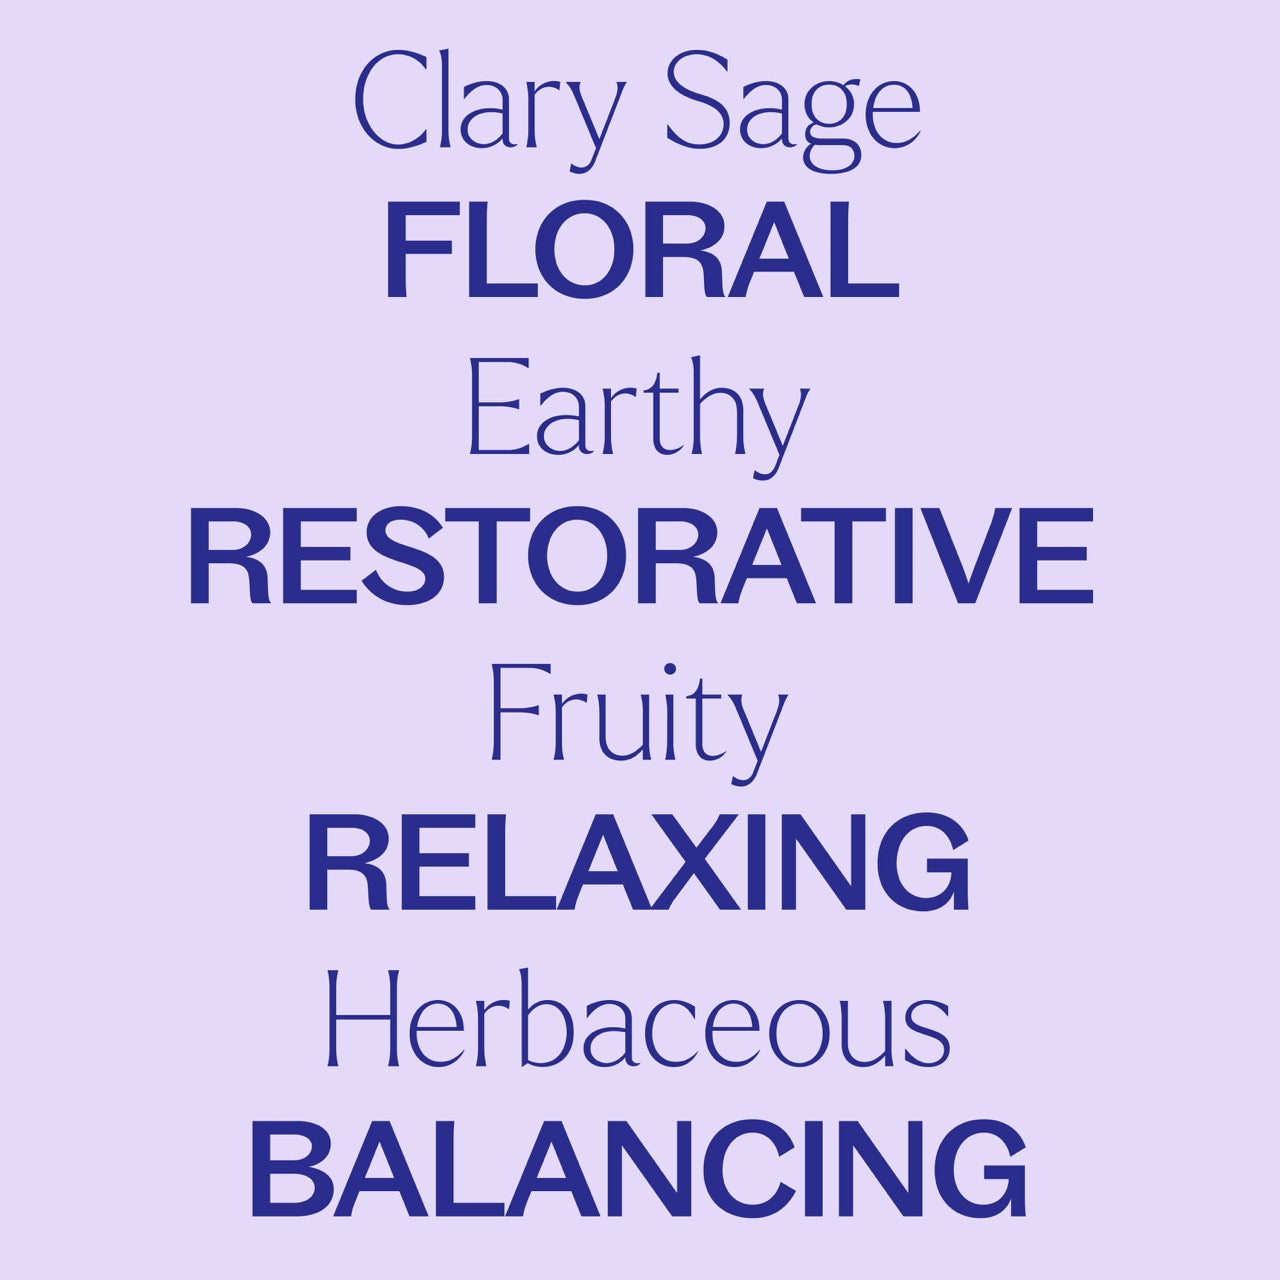 Clary Sage Essential Oil key features: Floral, earthy, restorative, fruity, relaxing, herbaceous, and balancing